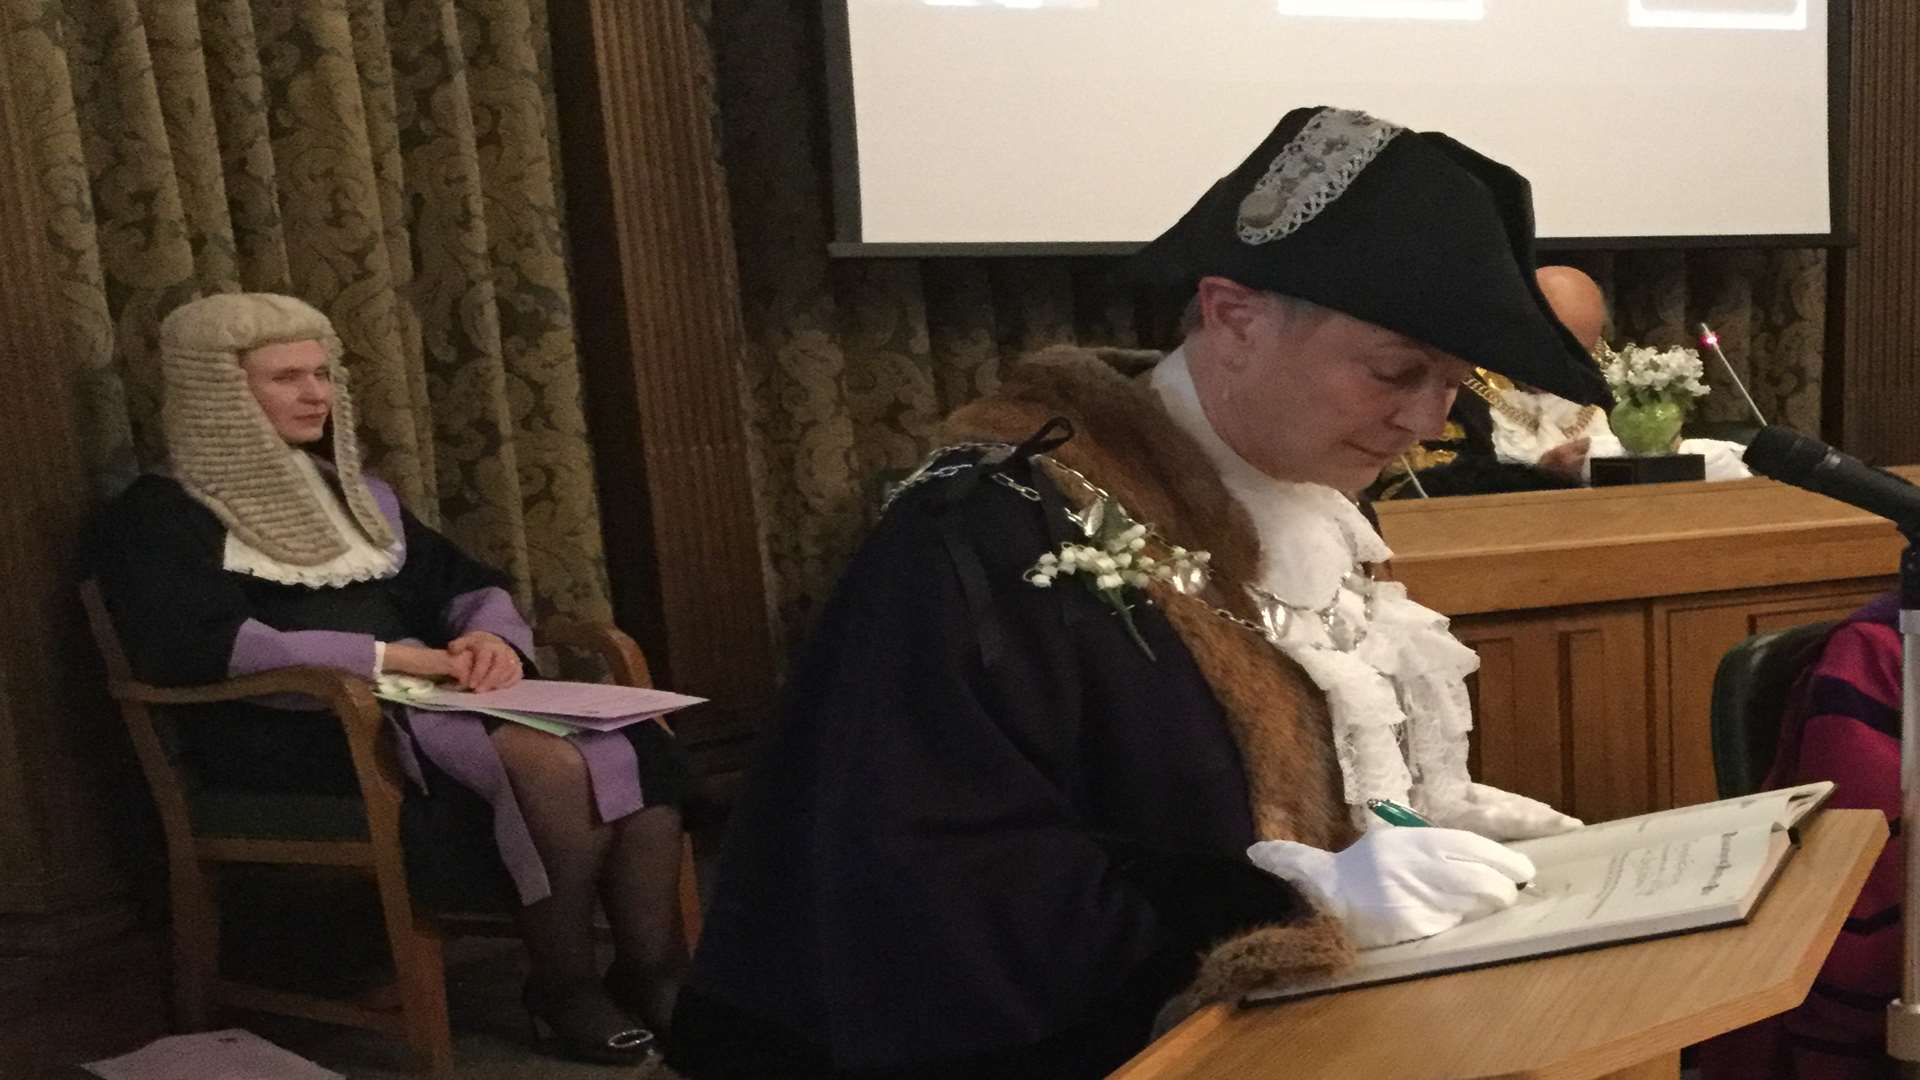 Cllr Rosemary Doyle signs the register to become the new Lord Mayor of Canterbury.